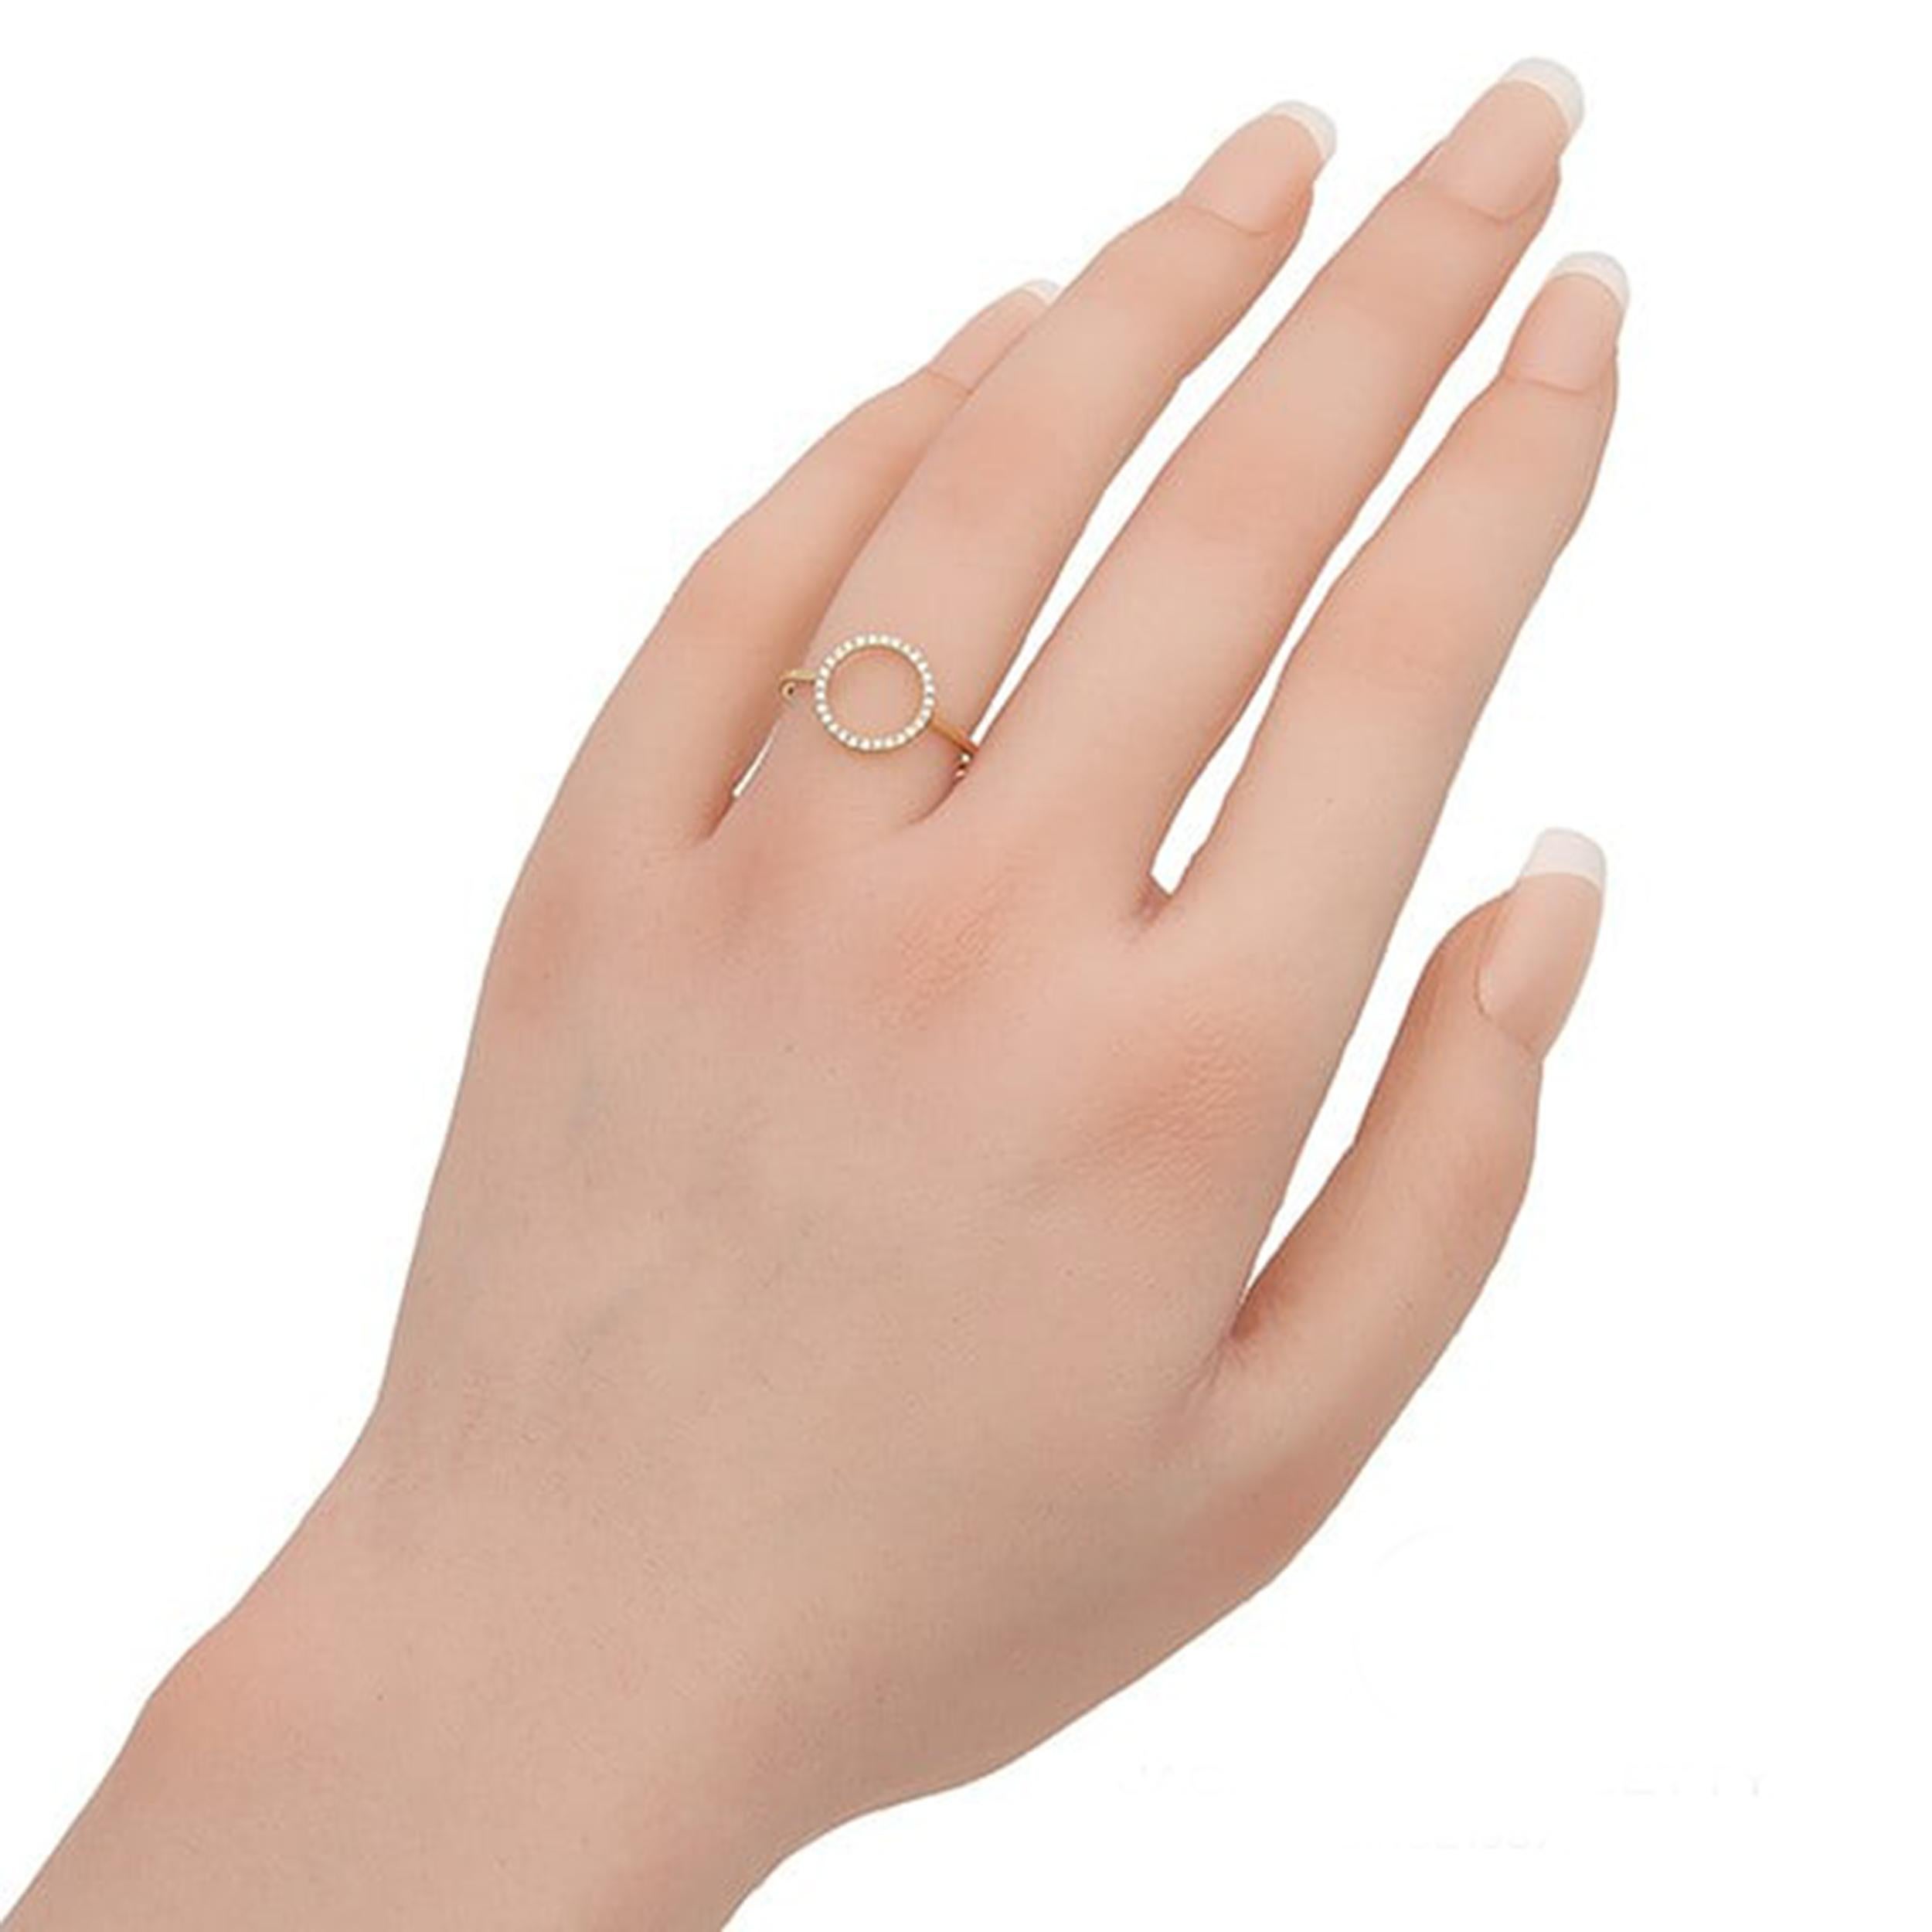 Elevate your style with this elegant 18K yellow gold diamond circle ring. Crafted from luxurious yellow gold, this ring features a sleek and modern design, perfect for adding a touch of sophistication to any outfit. The ring is adorned with a